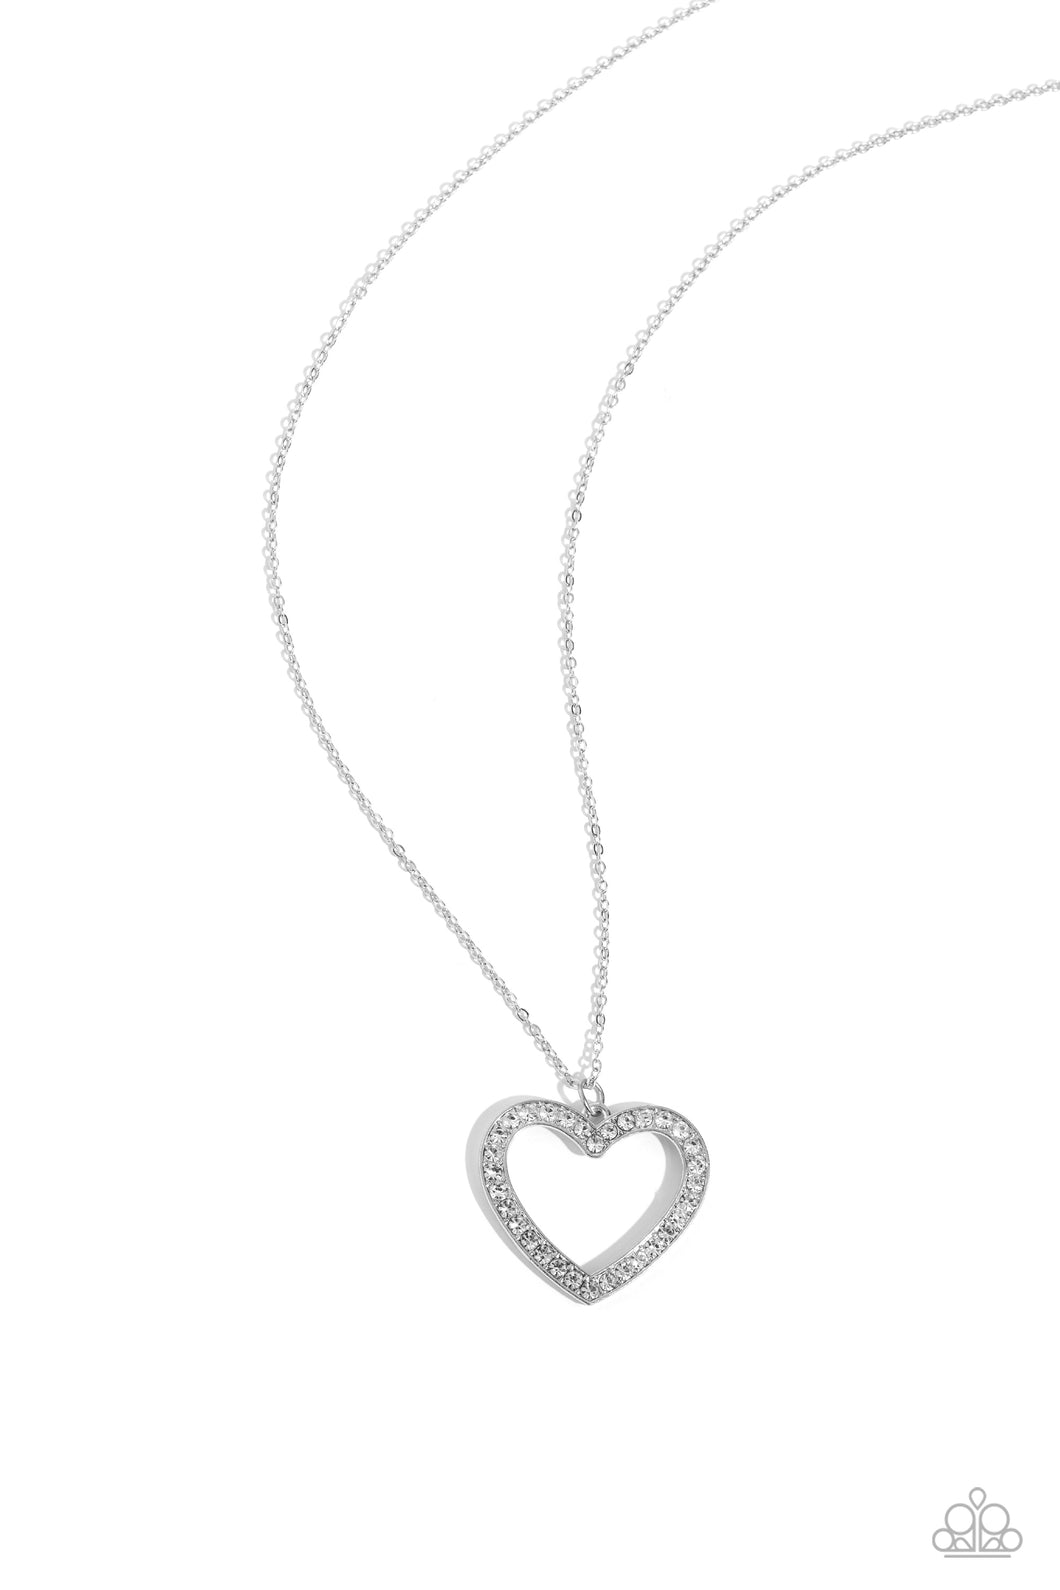 A silver heart-shaped silhouette is outlined with a border of white rhinestones and suspended from the bottom of a long silver chain. The glitzy rhinestones infuse the simple concept with irresistible sparkle, bringing a hint of glam to the charming design. Features an adjustable clasp closure.